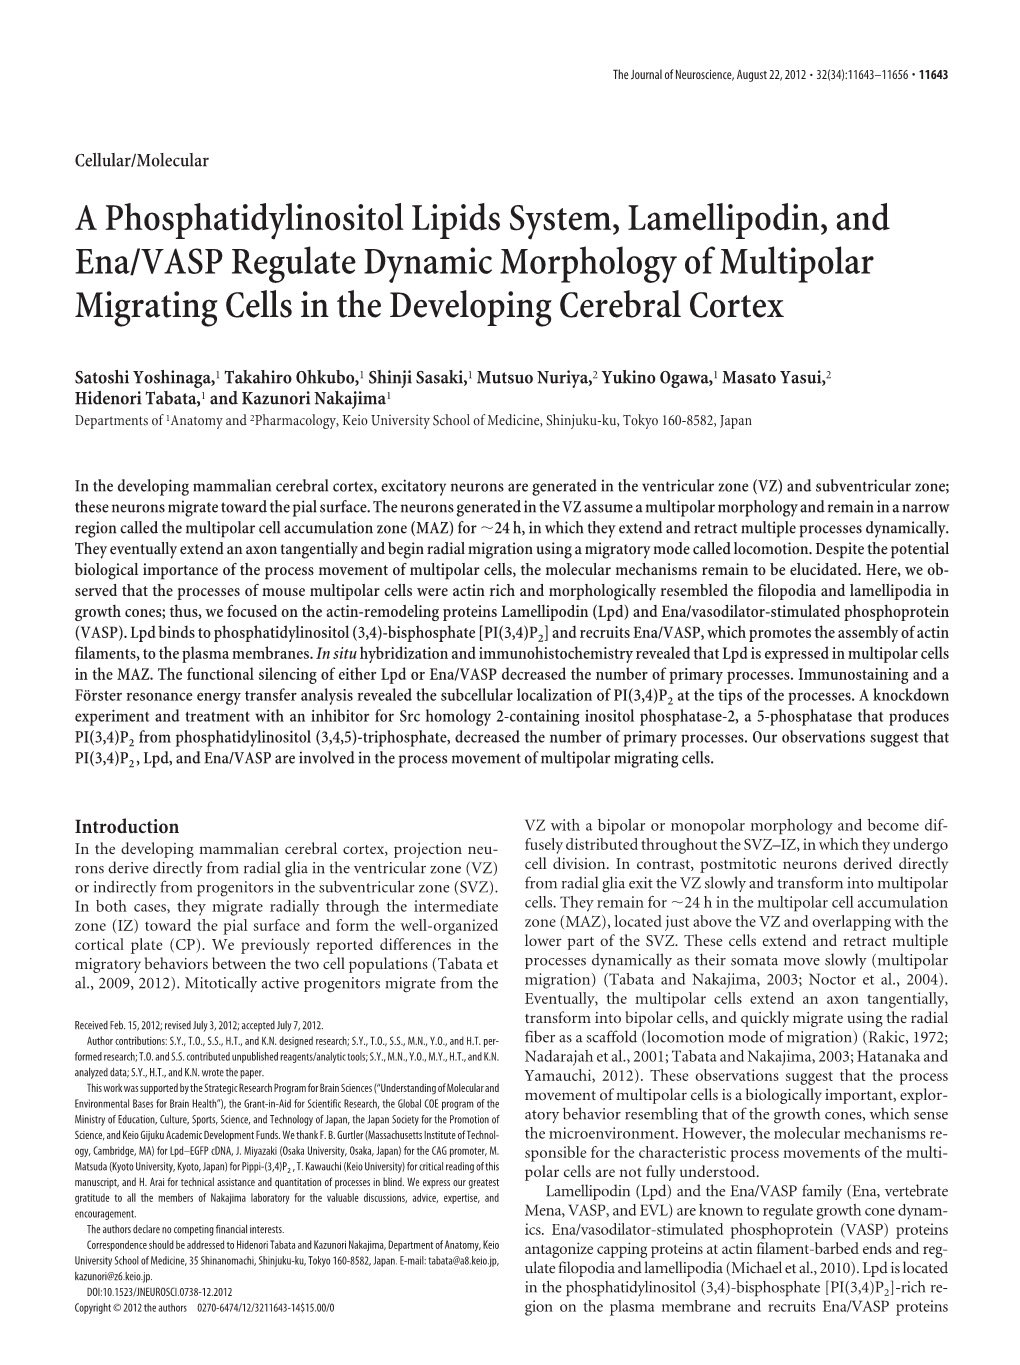 A Phosphatidylinositol Lipids System, Lamellipodin, and Ena/VASP Regulate Dynamic Morphology of Multipolar Migrating Cells in the Developing Cerebral Cortex